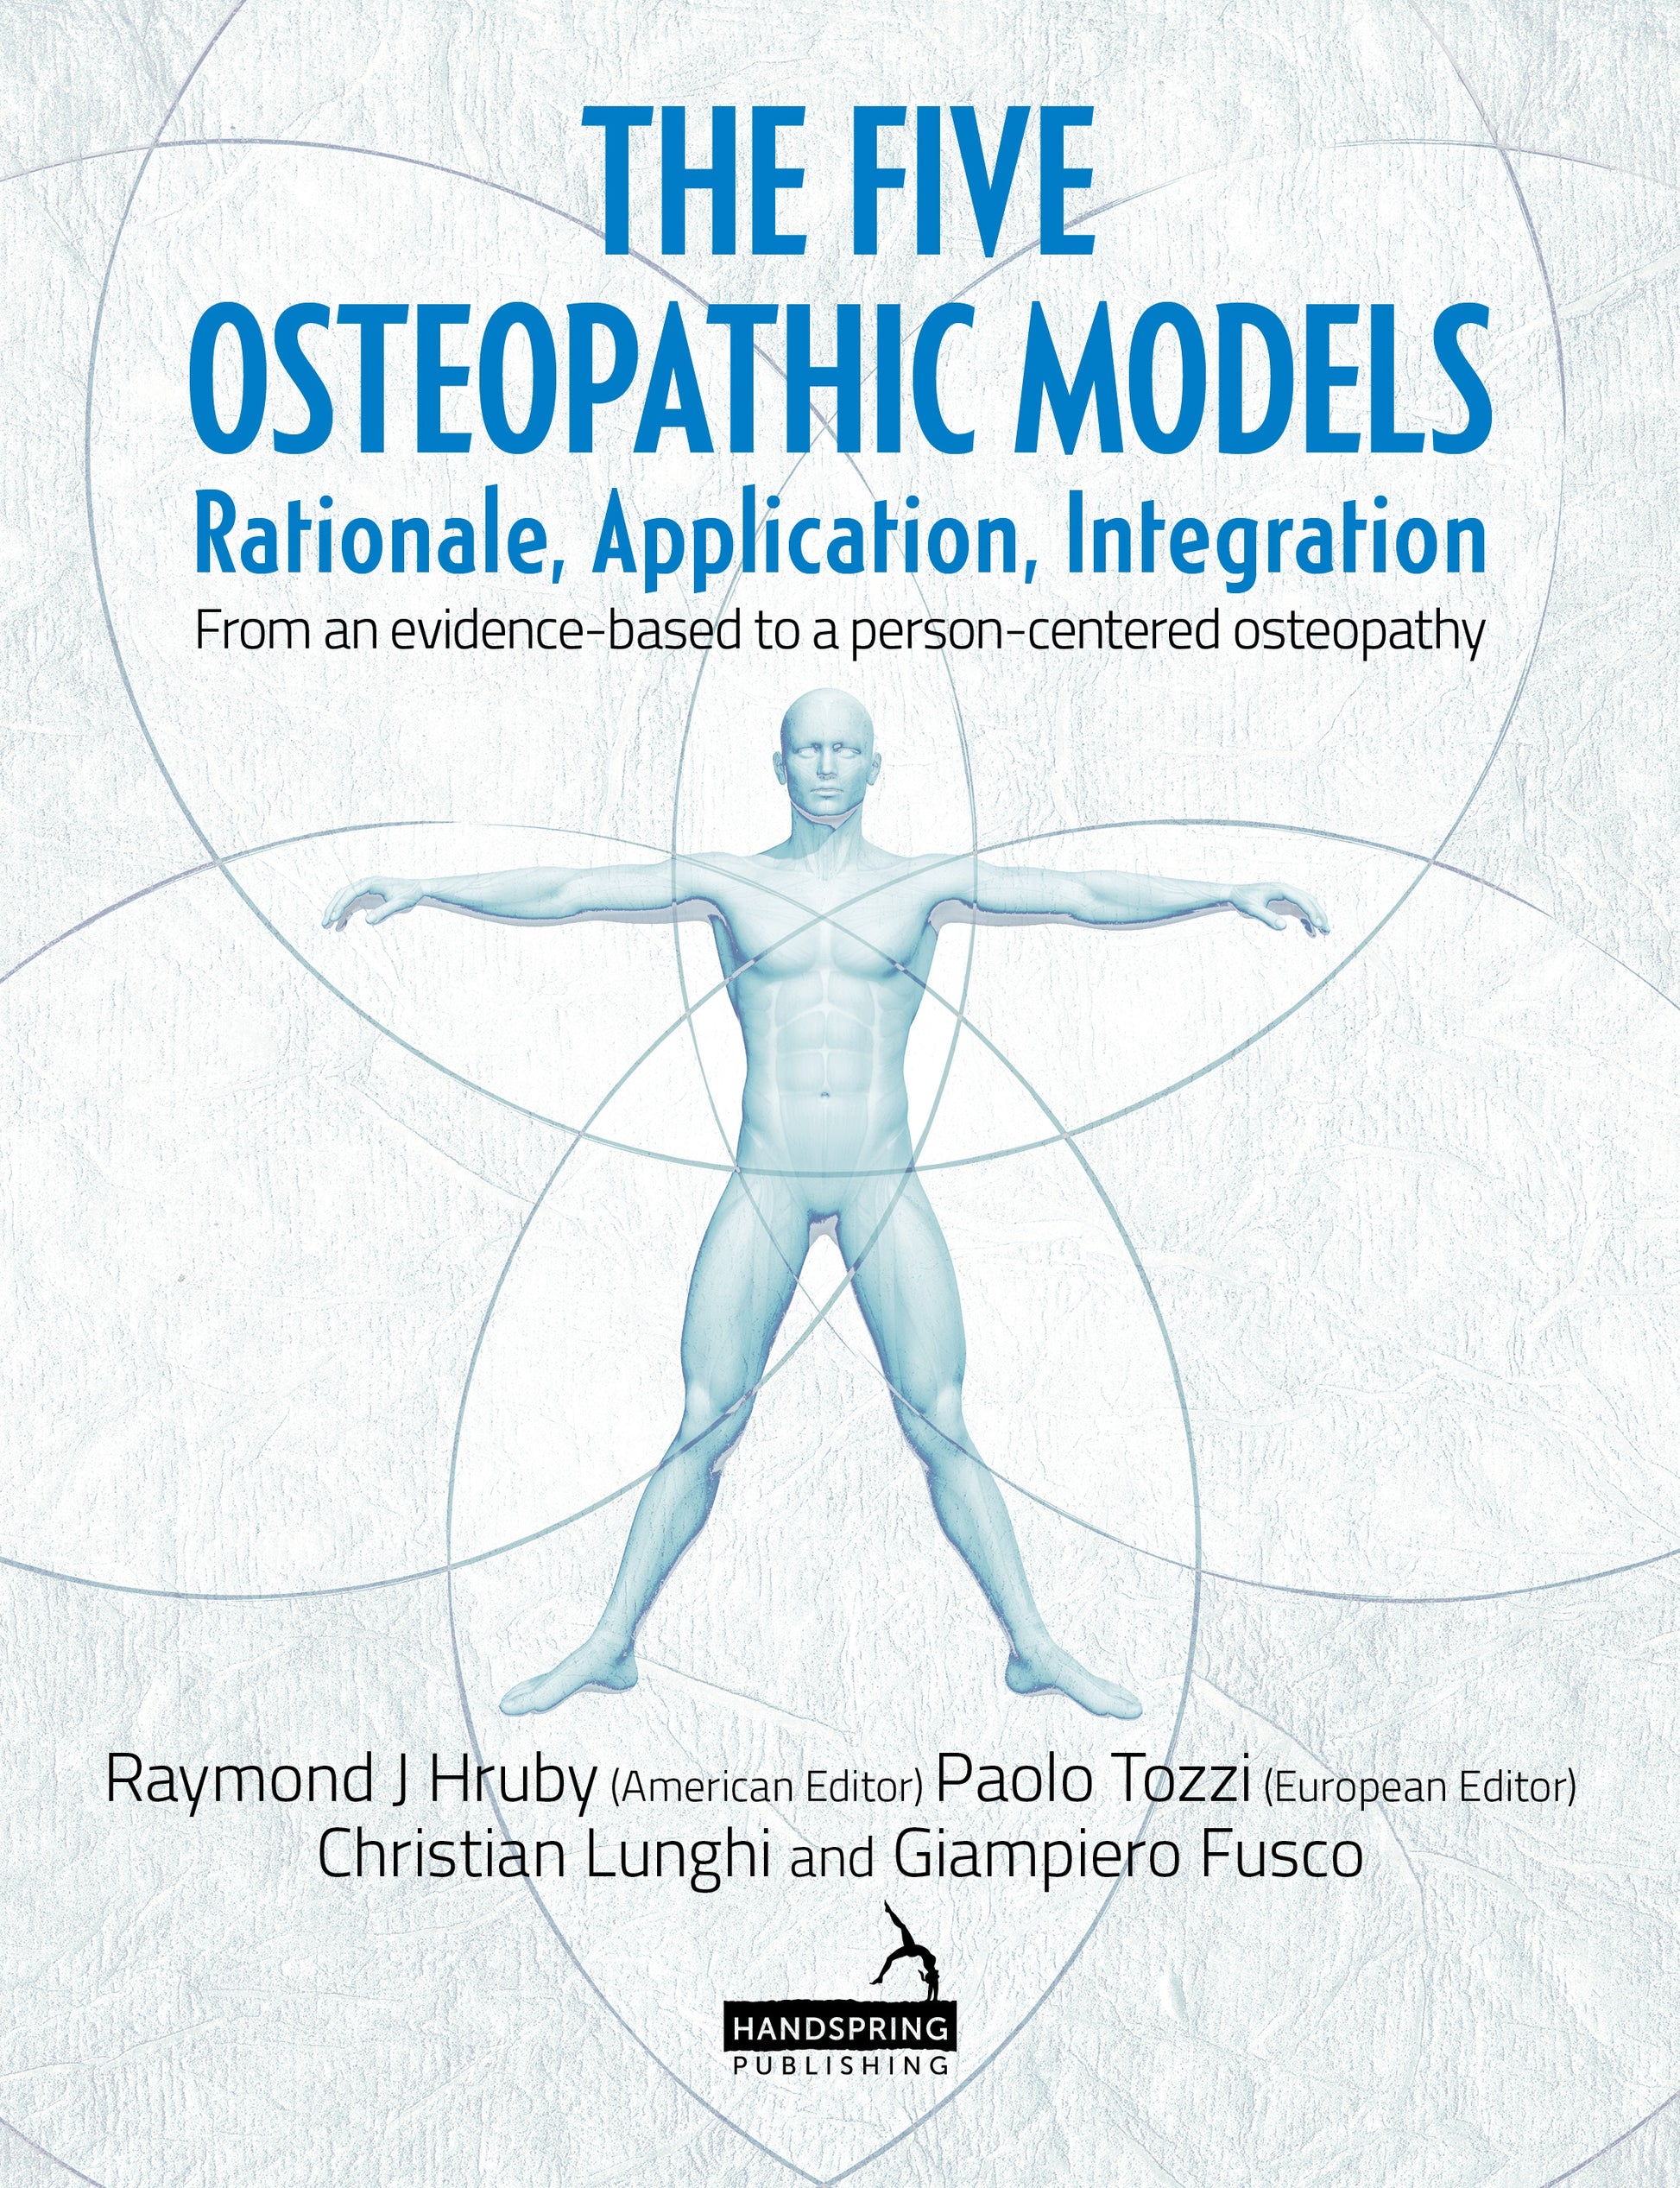 The Five Osteopathic Models by Paolo Tozzi, Ray Hruby, Giampiero Fusco, Christian Lunghi